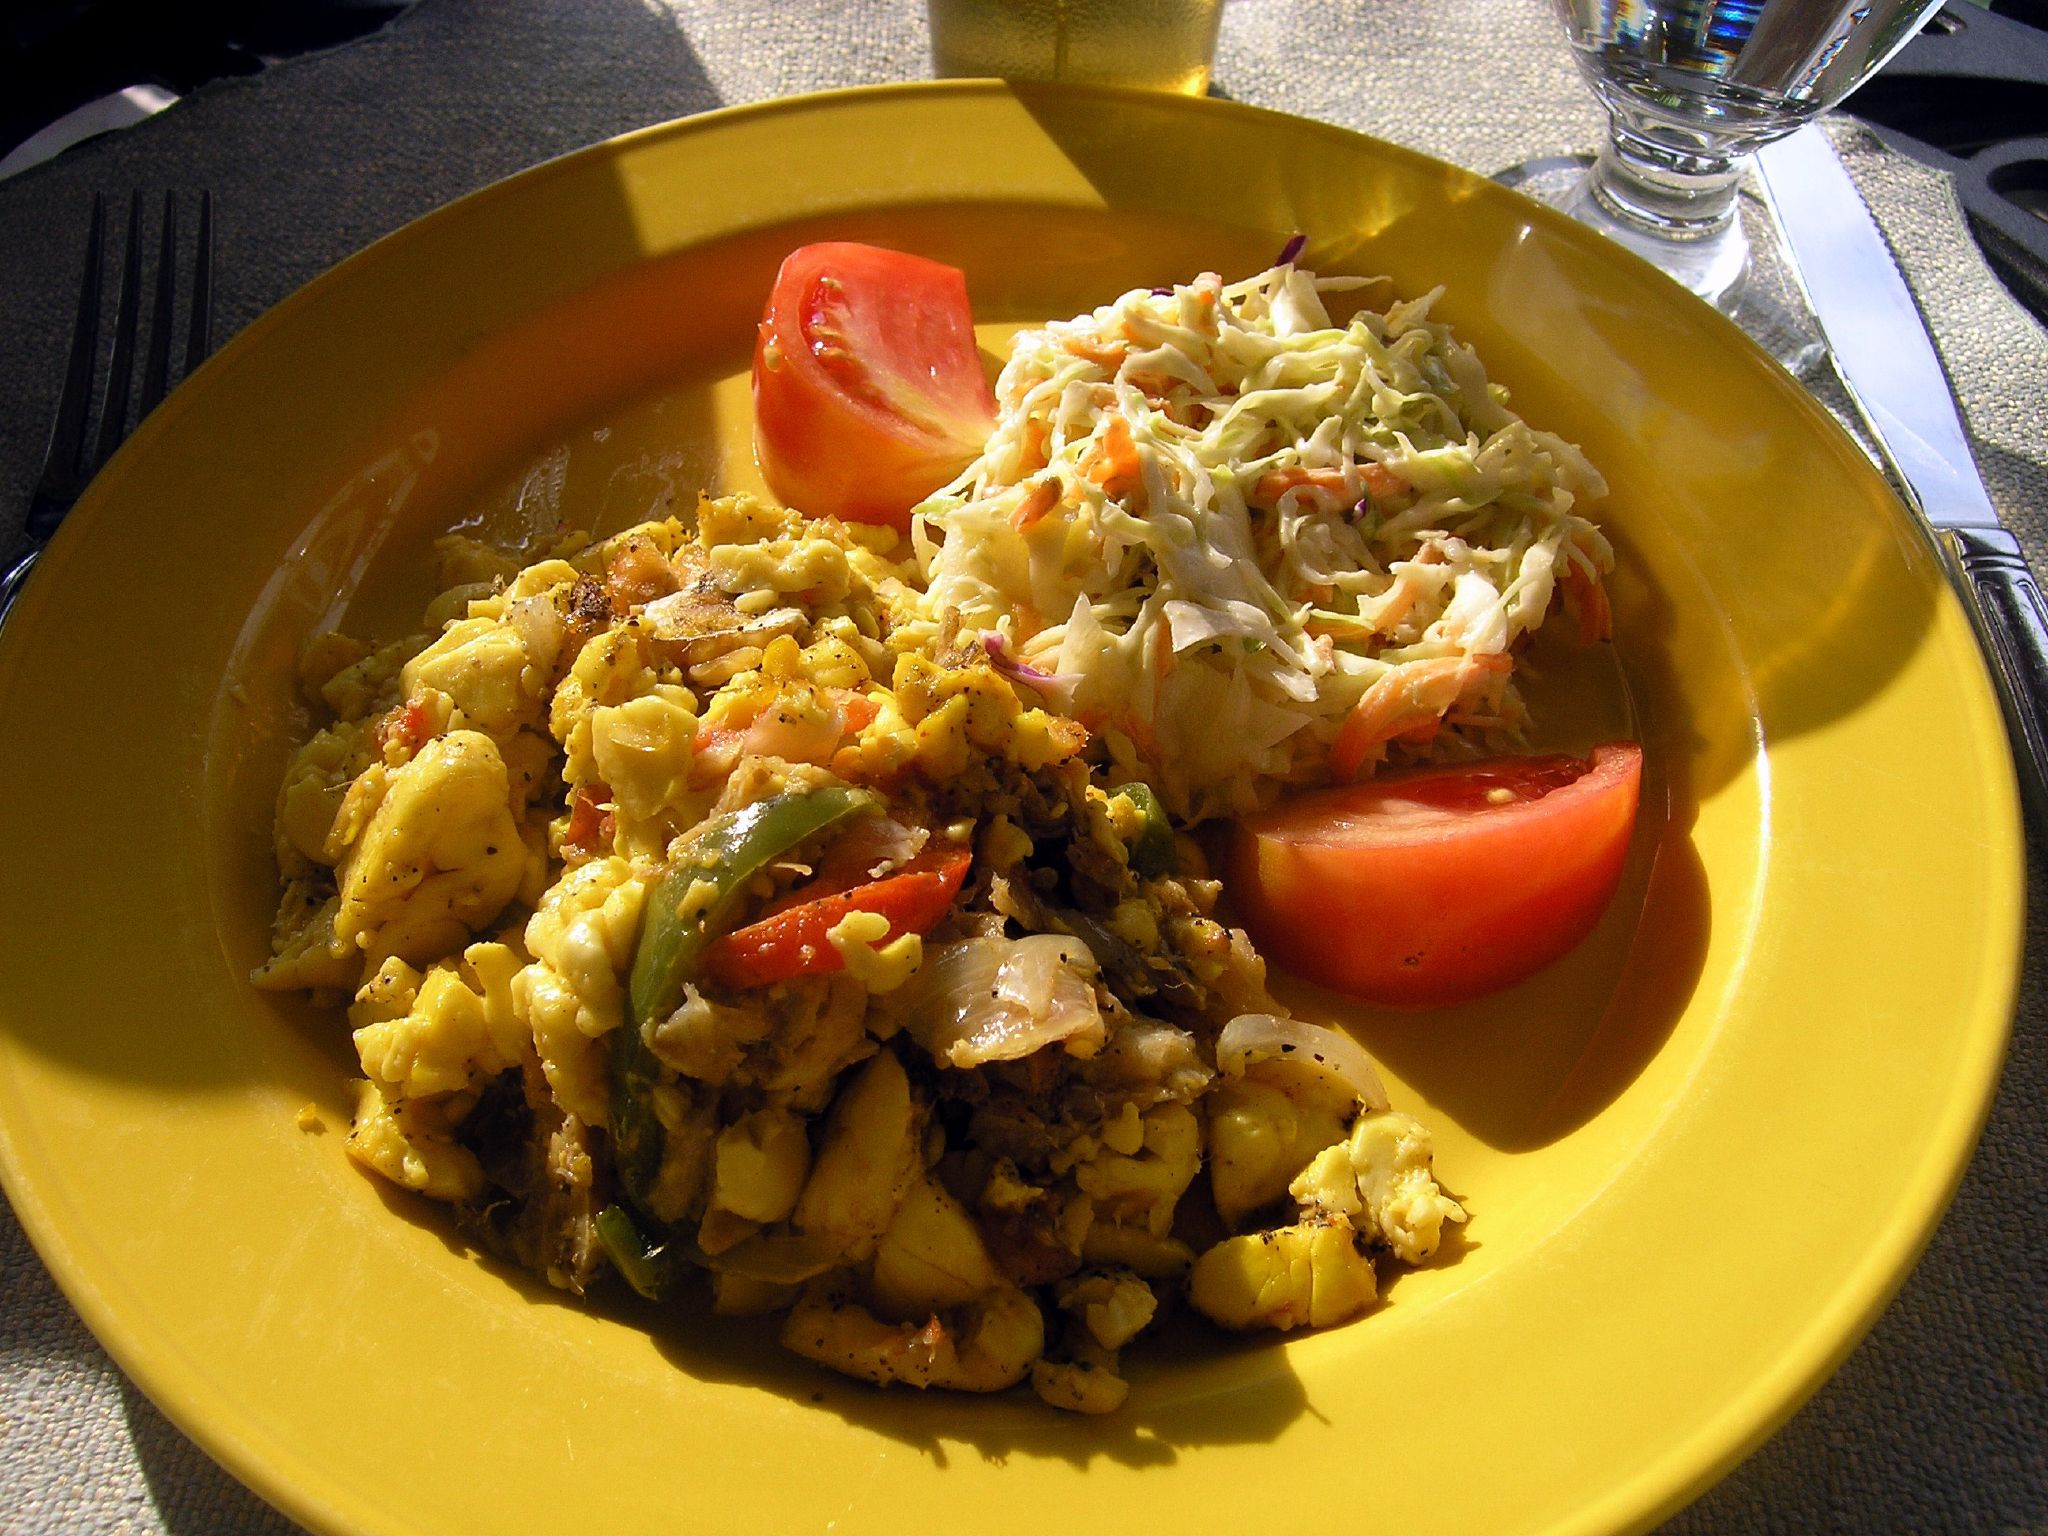 Best Recipe To Make Ackee and Saltfish